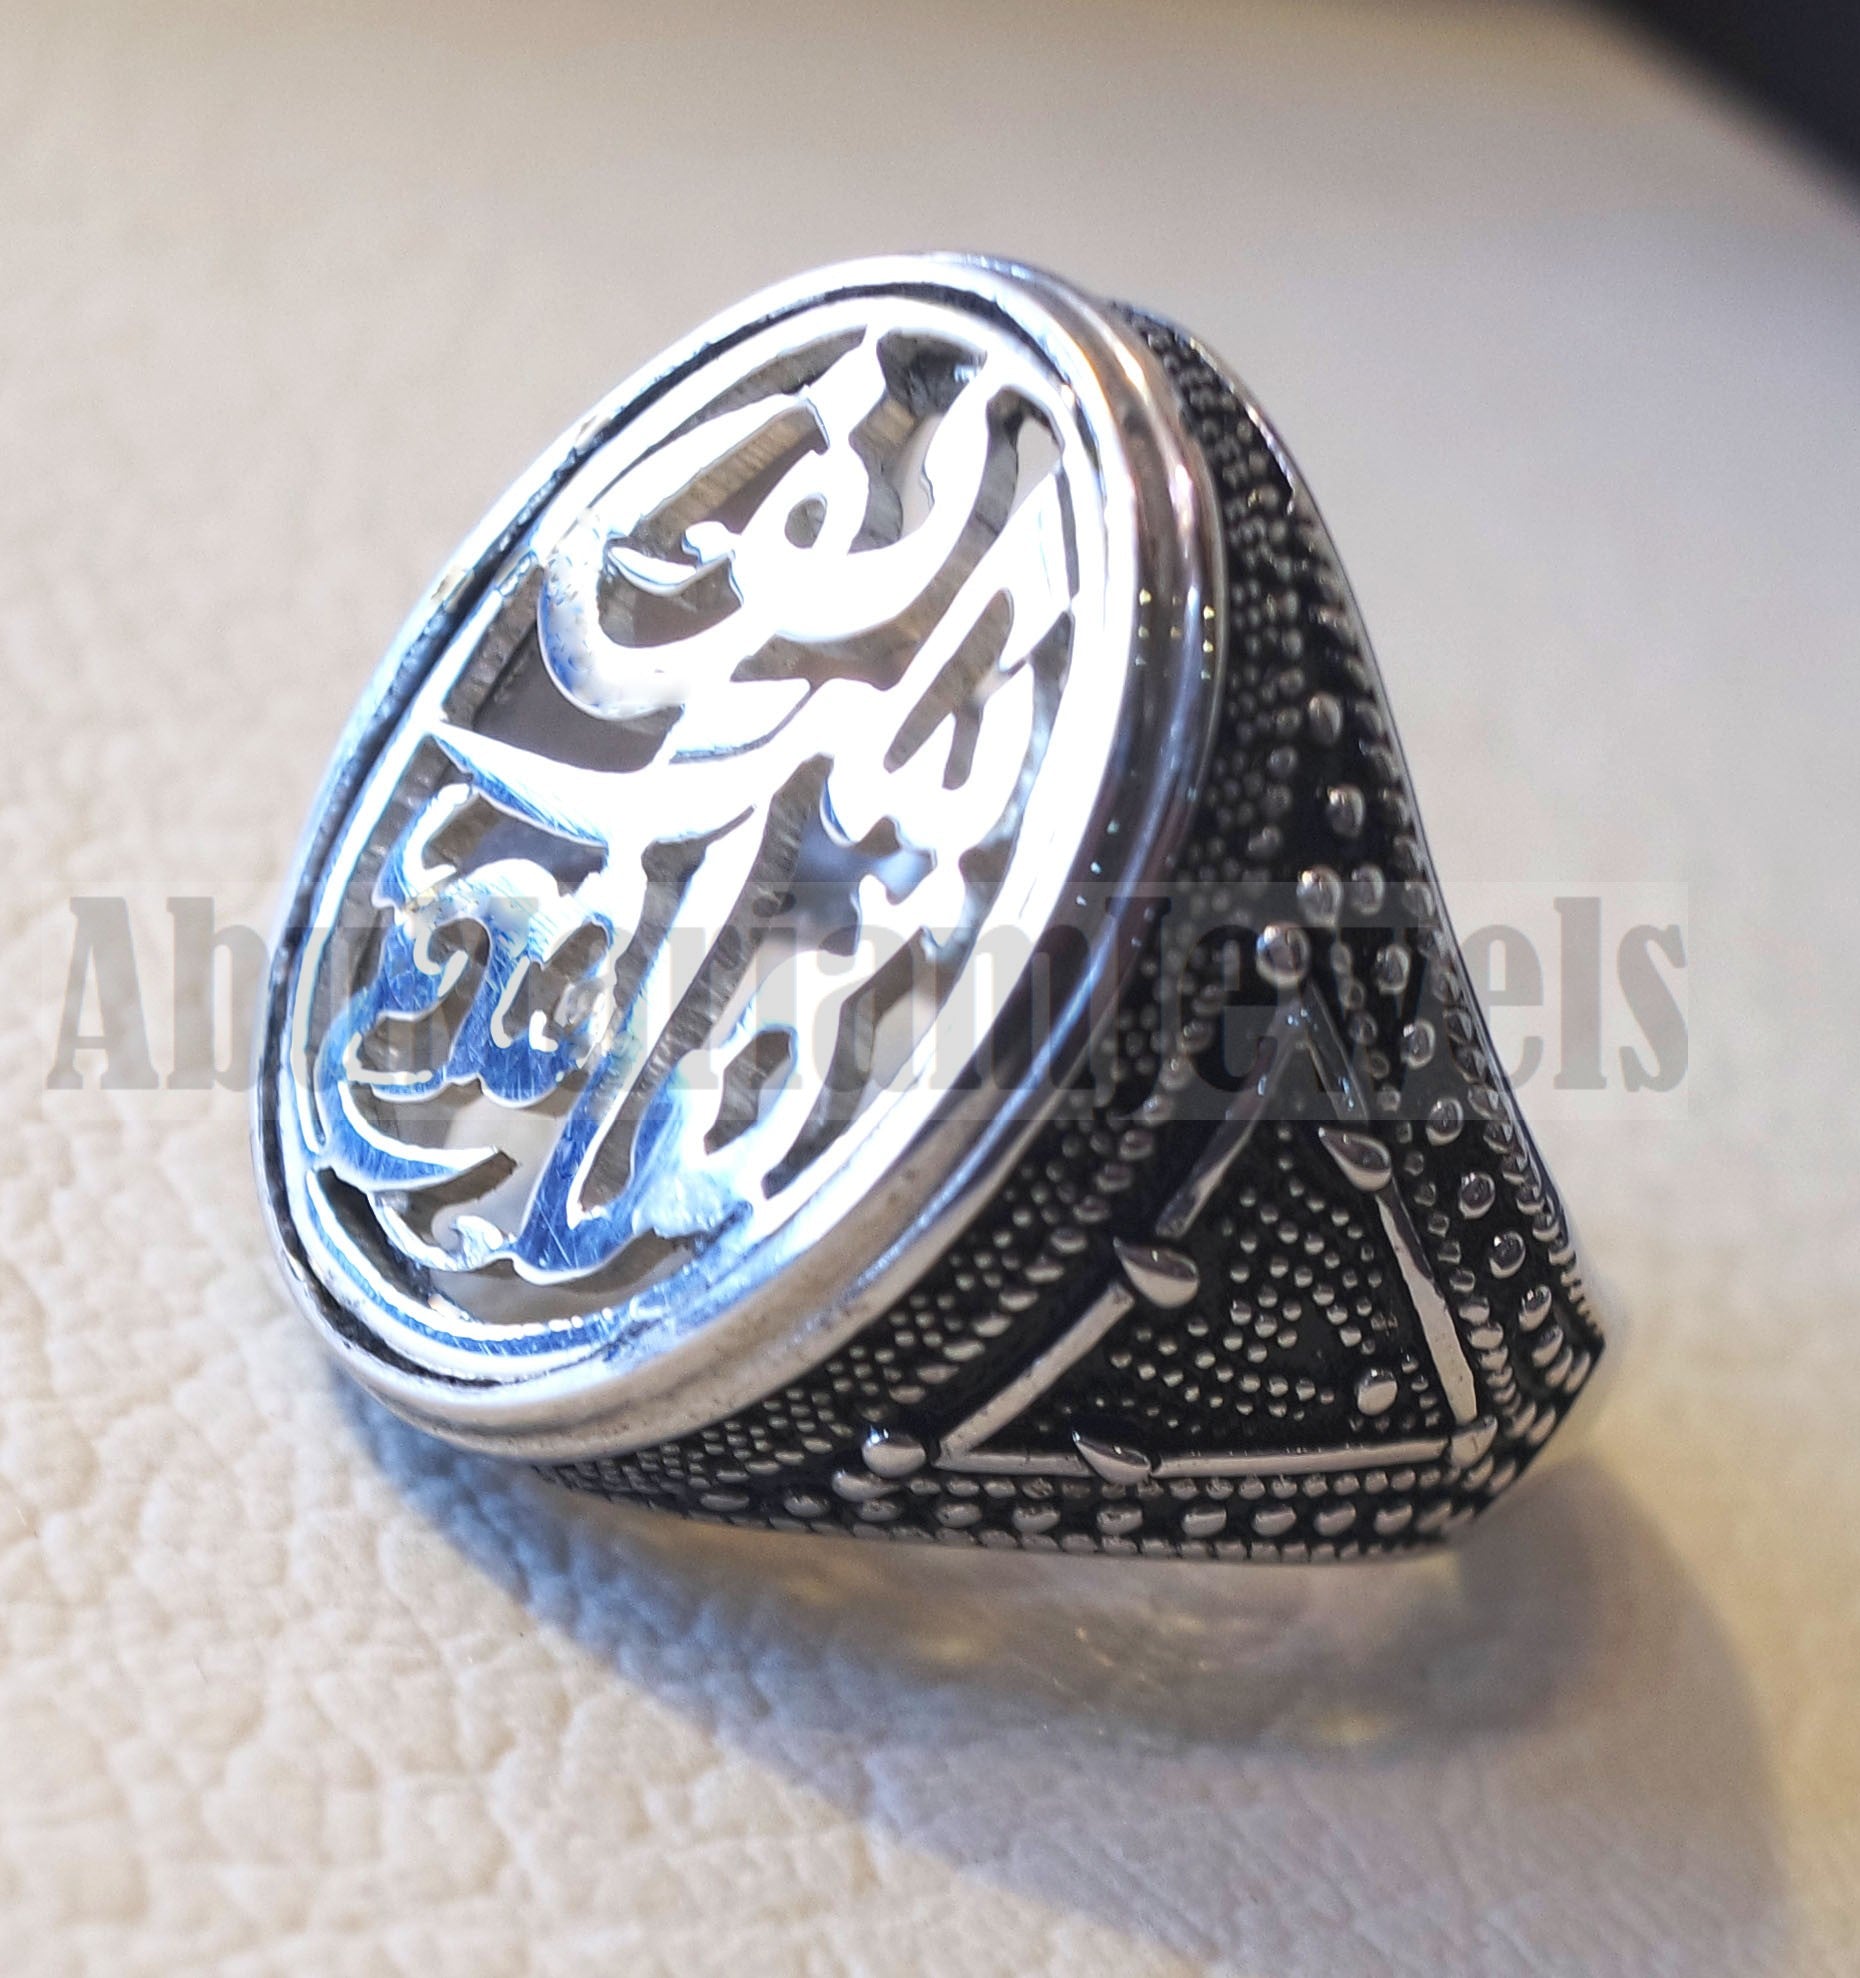 Customized Arabic calligraphy names handmade ring personalized antique jewelry style sterling silver 925 any size TSN1006 خاتم اسم تفصيل